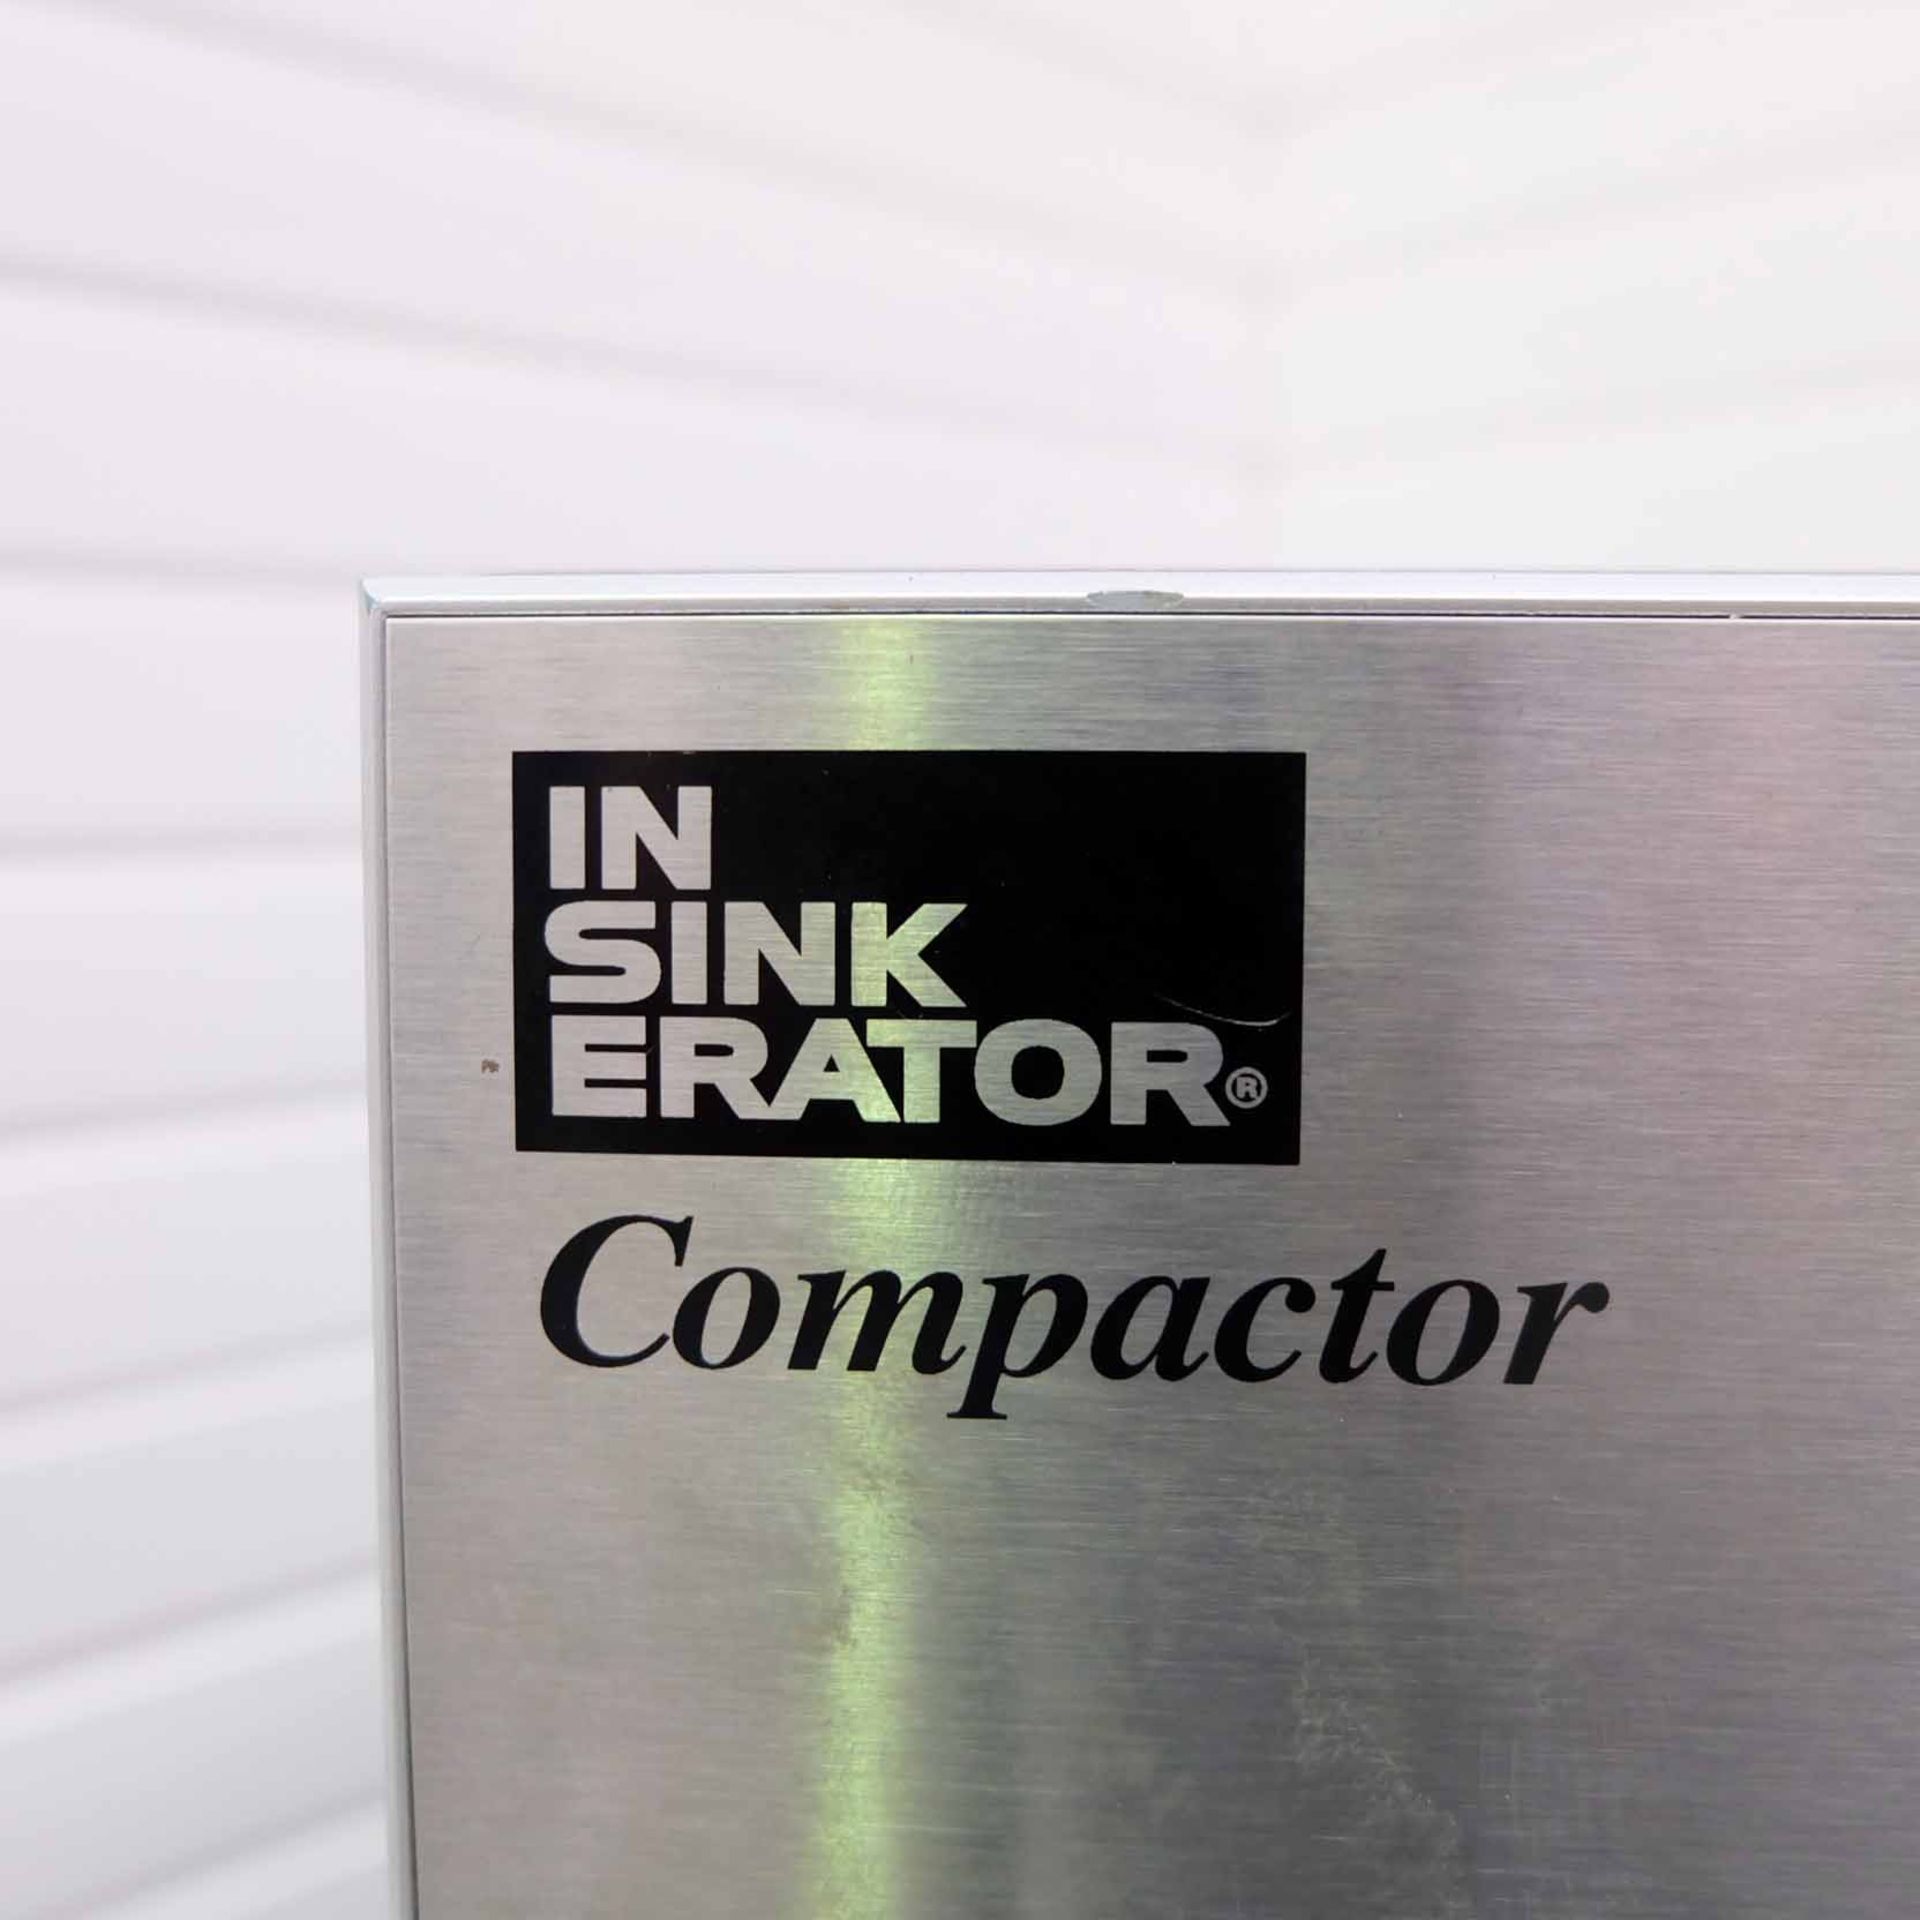 In Sink Erator Compactor. Internal Dimensions 207mm W x 440mm D x 425mm H. - Image 8 of 8